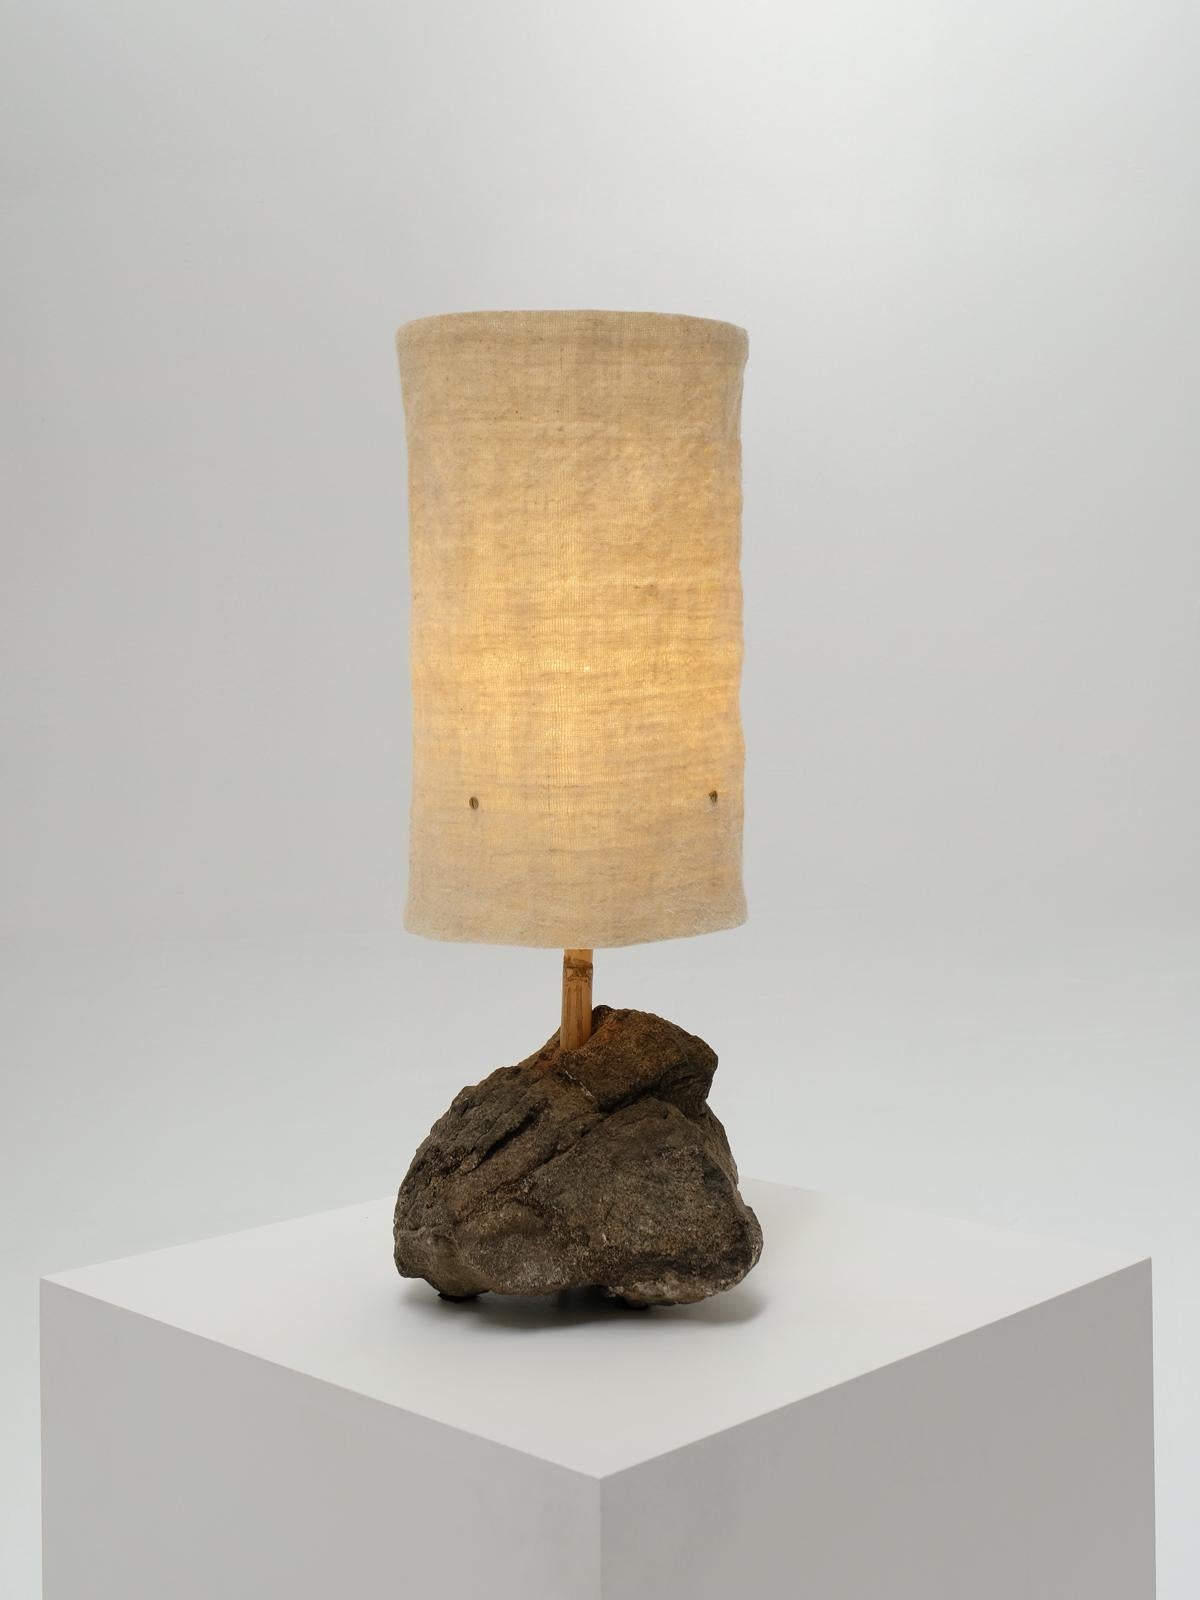 Moroccan Hjra Table Lamp Large, Handspun, Handwoven wool Lampshade, Made of Rock & Reed For Sale